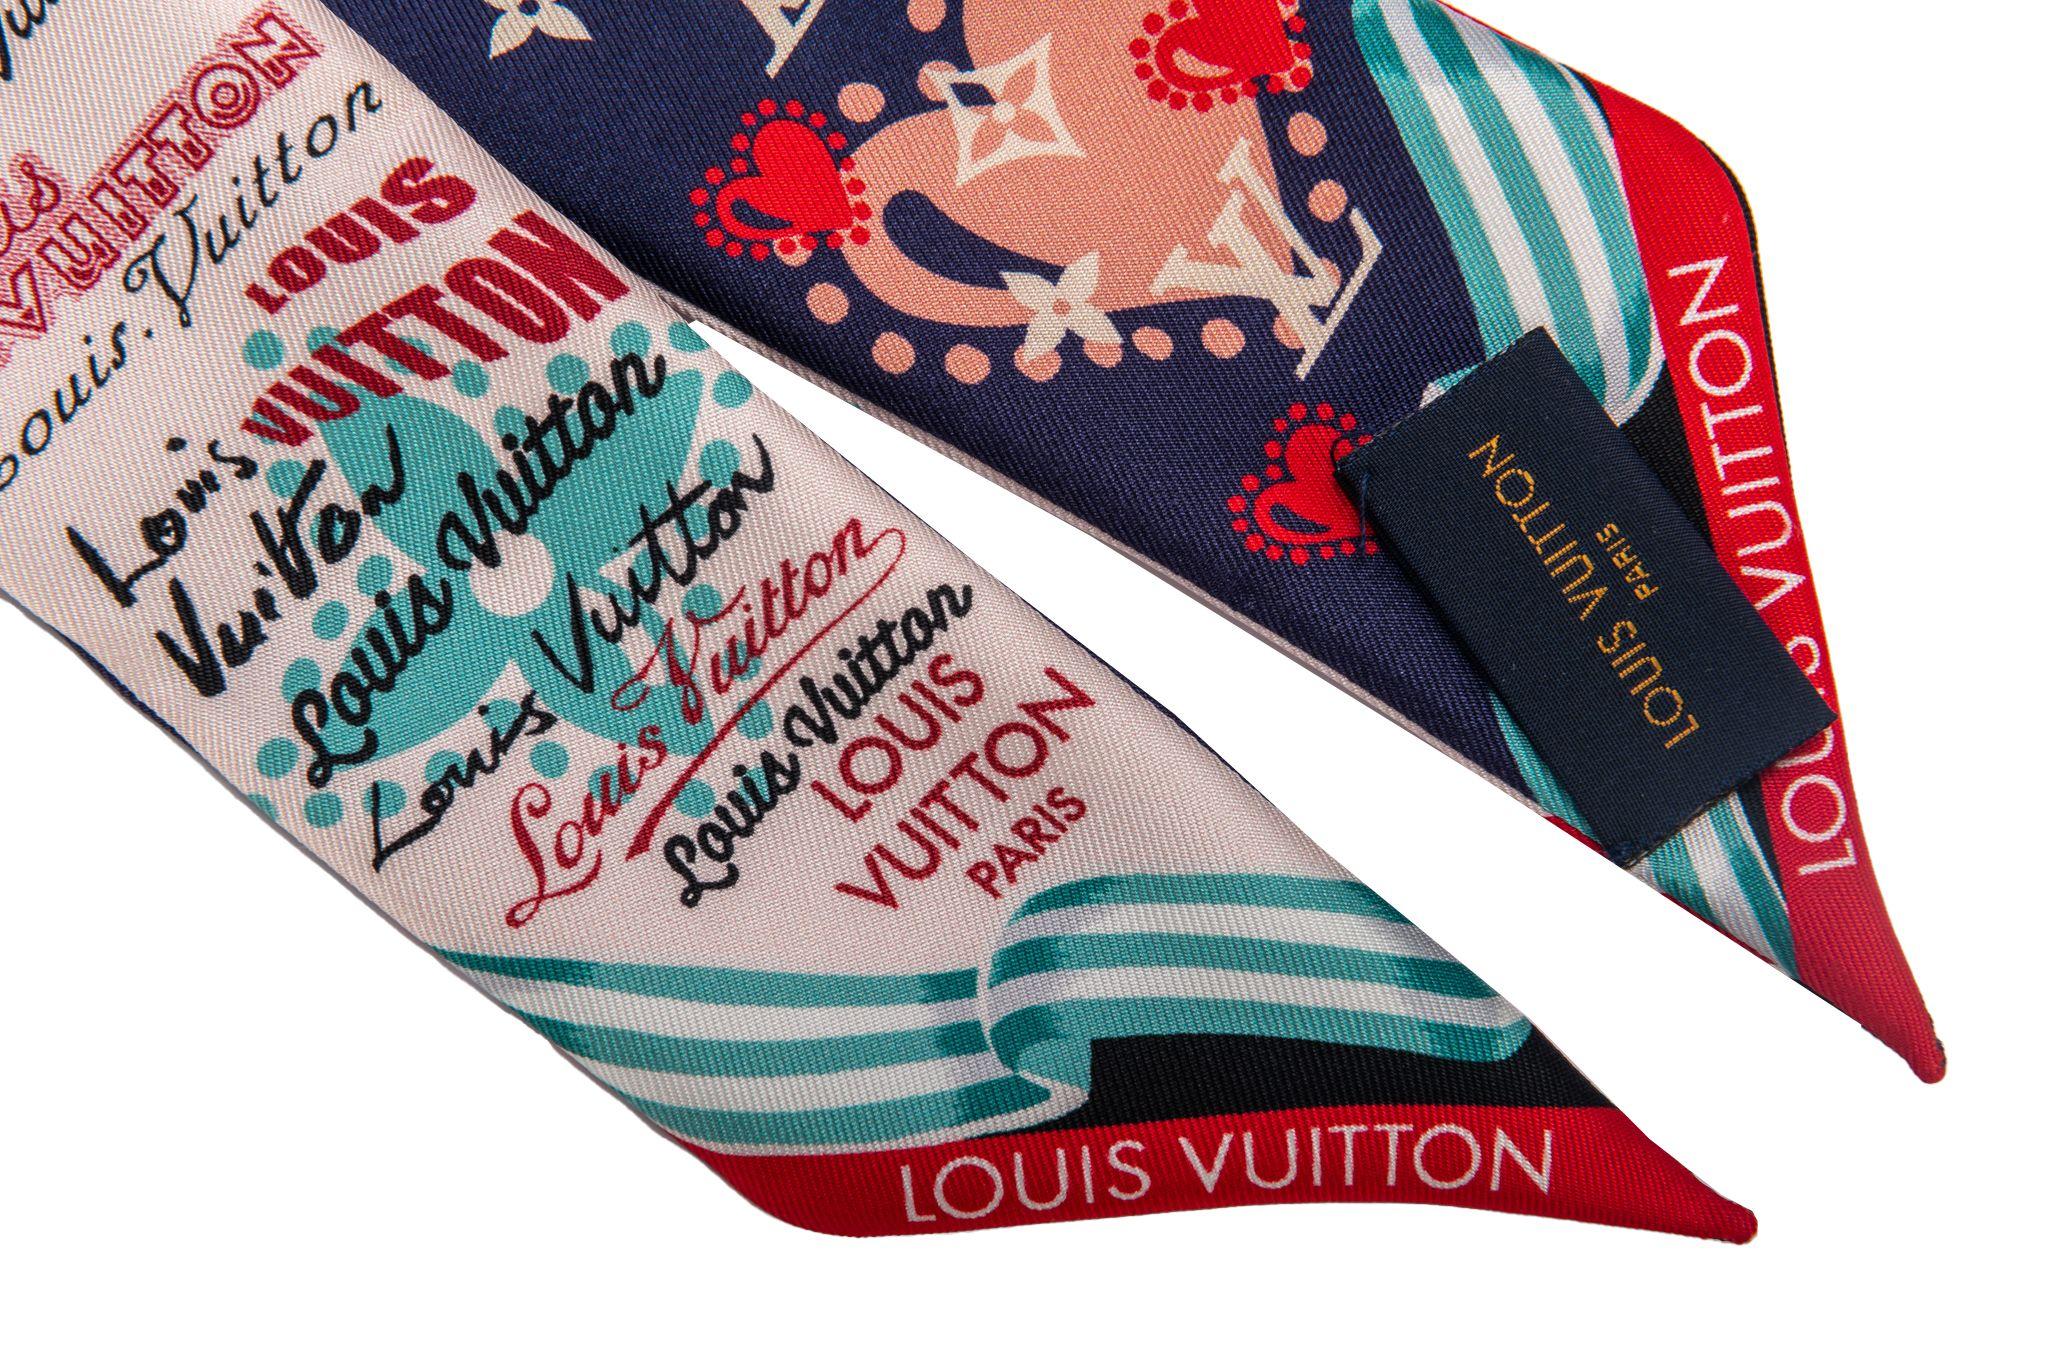 Louis Vuitton UP AND AWAY BANDEAU SCARF Red Multi Color BNIB Made in Italy